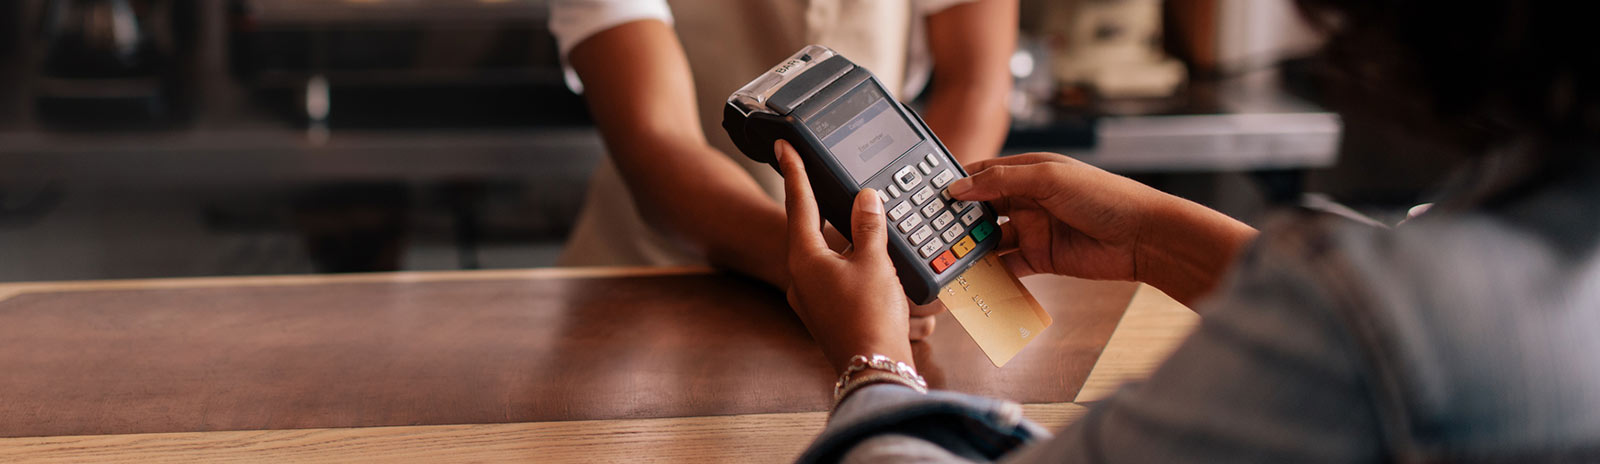 card payment at a point of sale